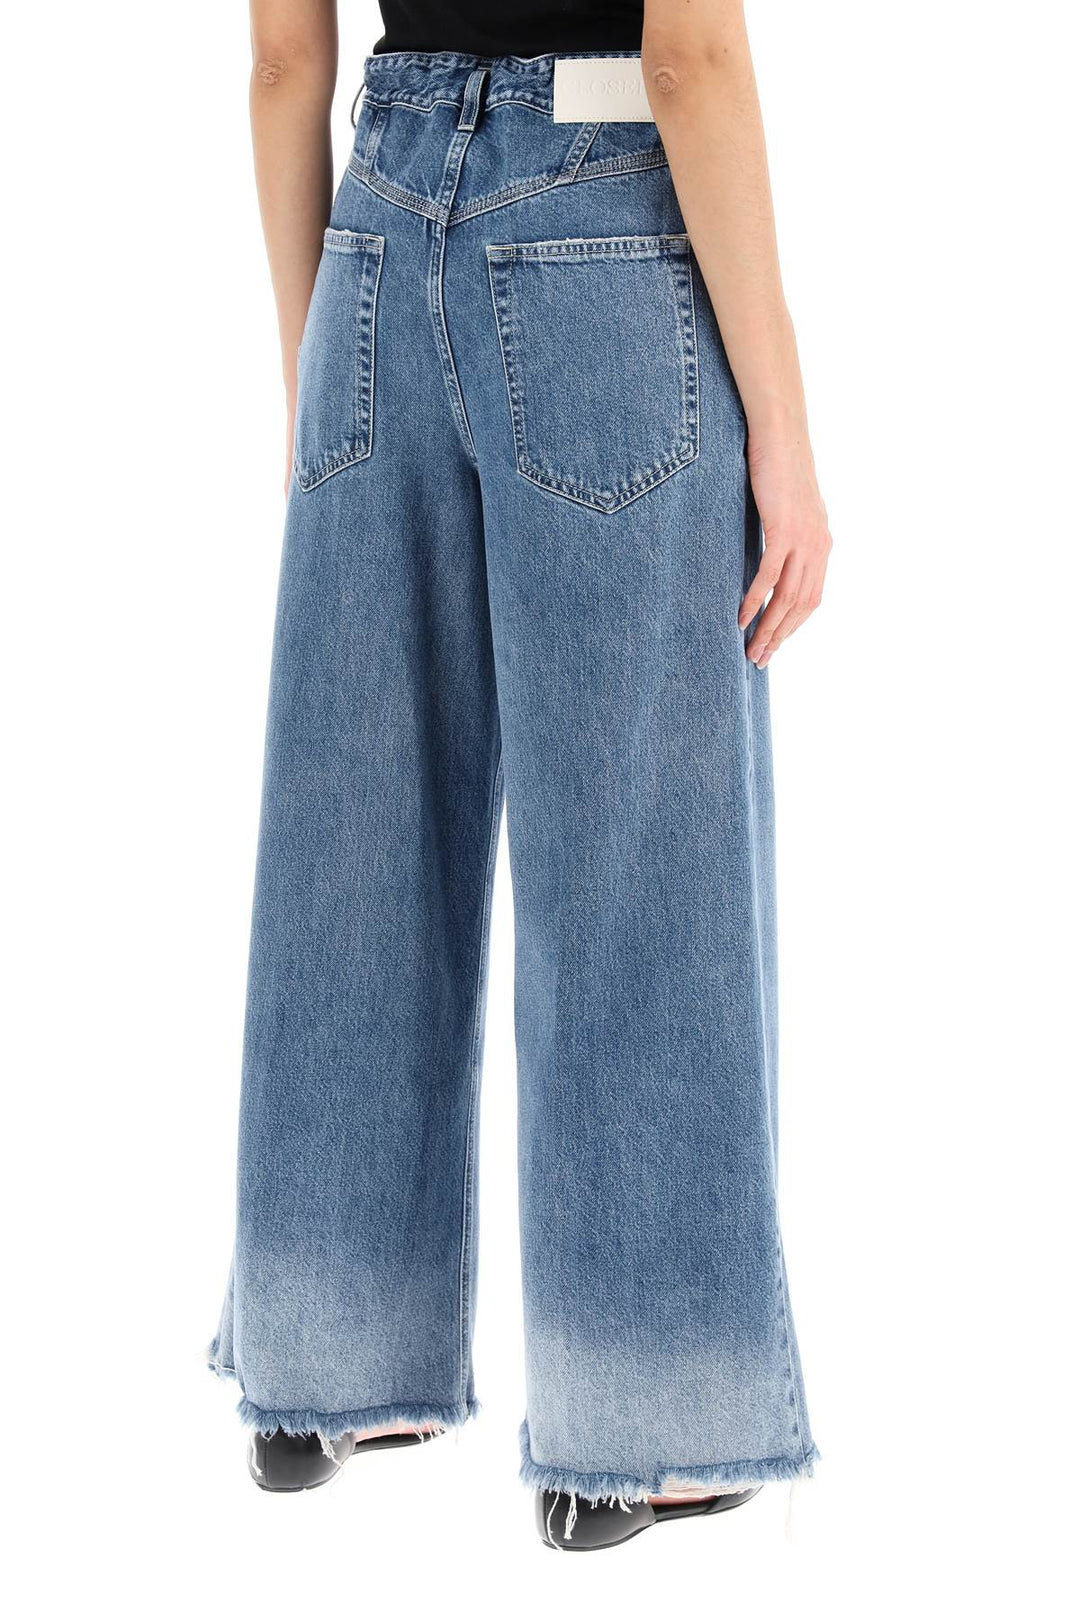 Closed Flare Morus Jeans With Distressed Details   Blu